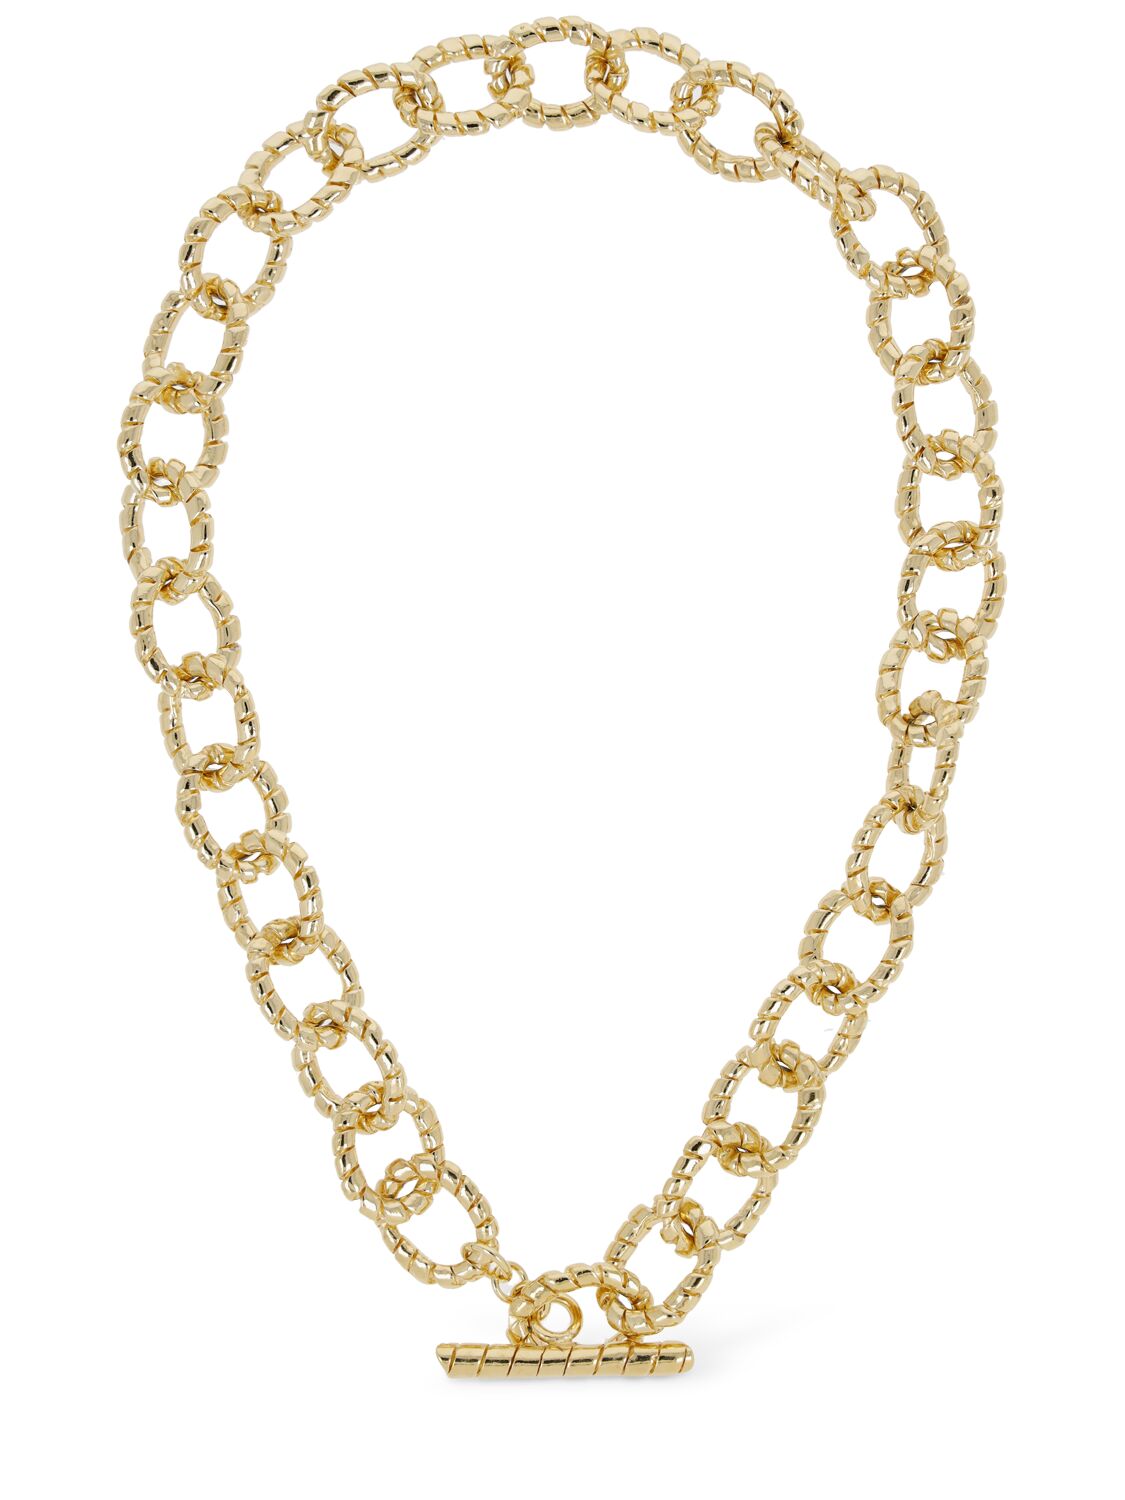 Paola Sighinolfi Cress Chain Collar Necklace In Gold